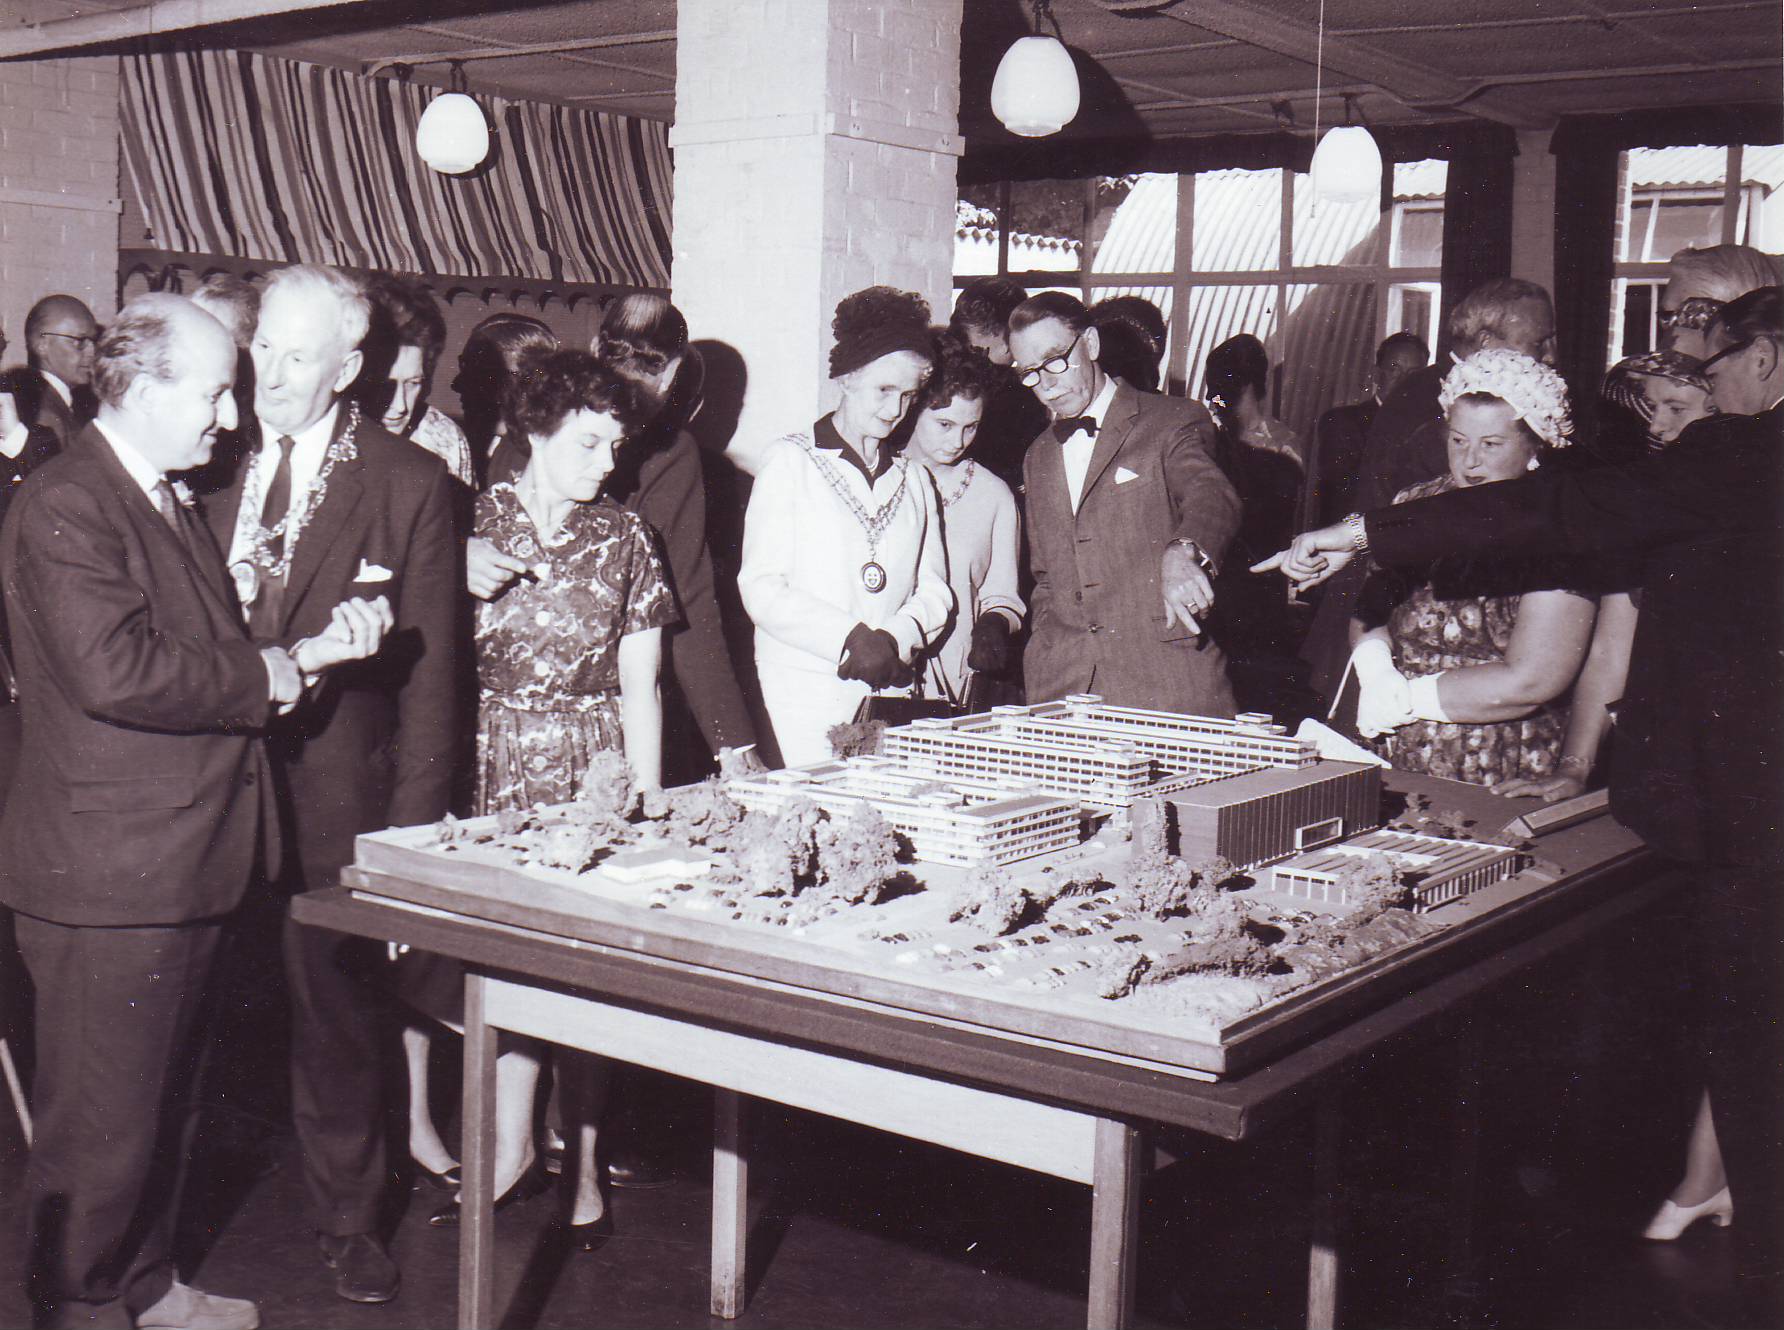 Dignitaries inspect a model of the Maybush building